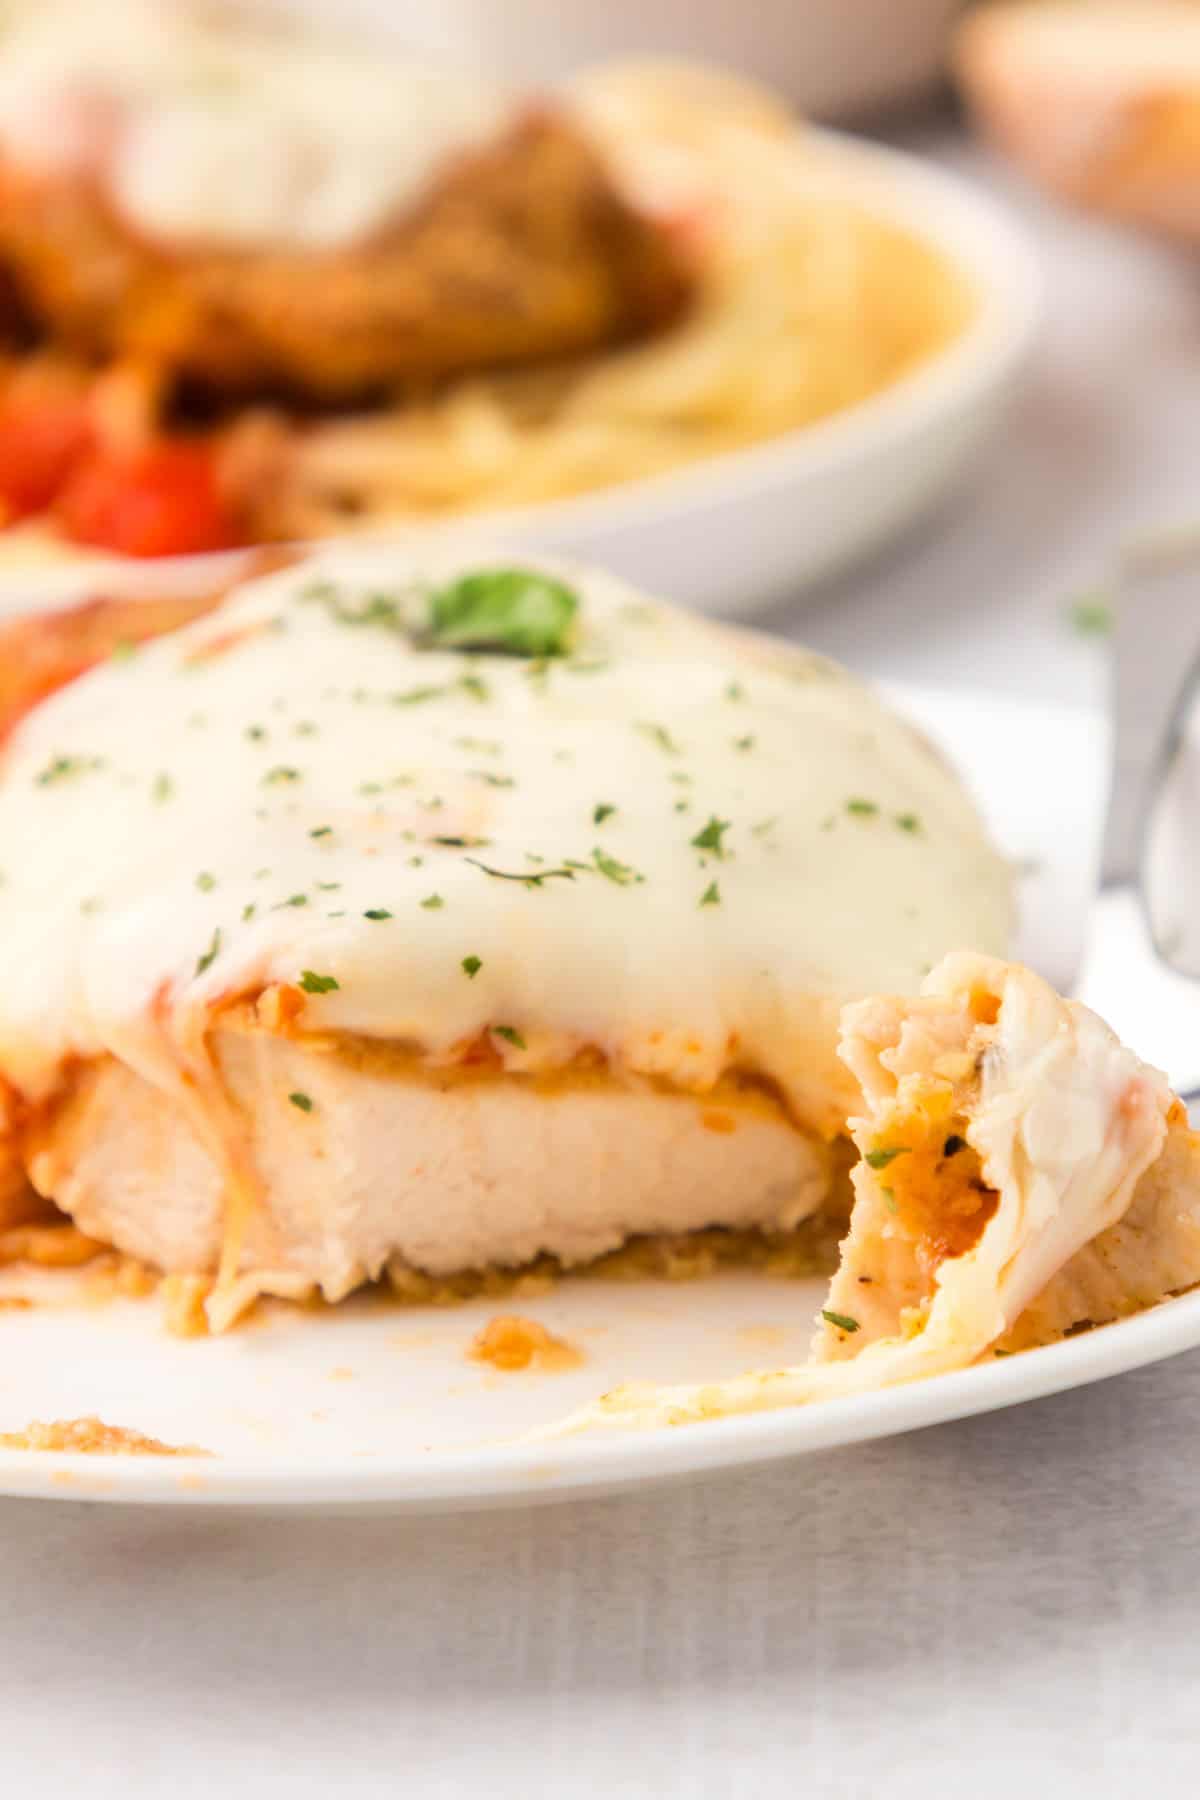 Oven Baked Chicken Parmesan is a delicious parmesan breaded chicken breast recipe topped with marinara and mozzarella cheese.